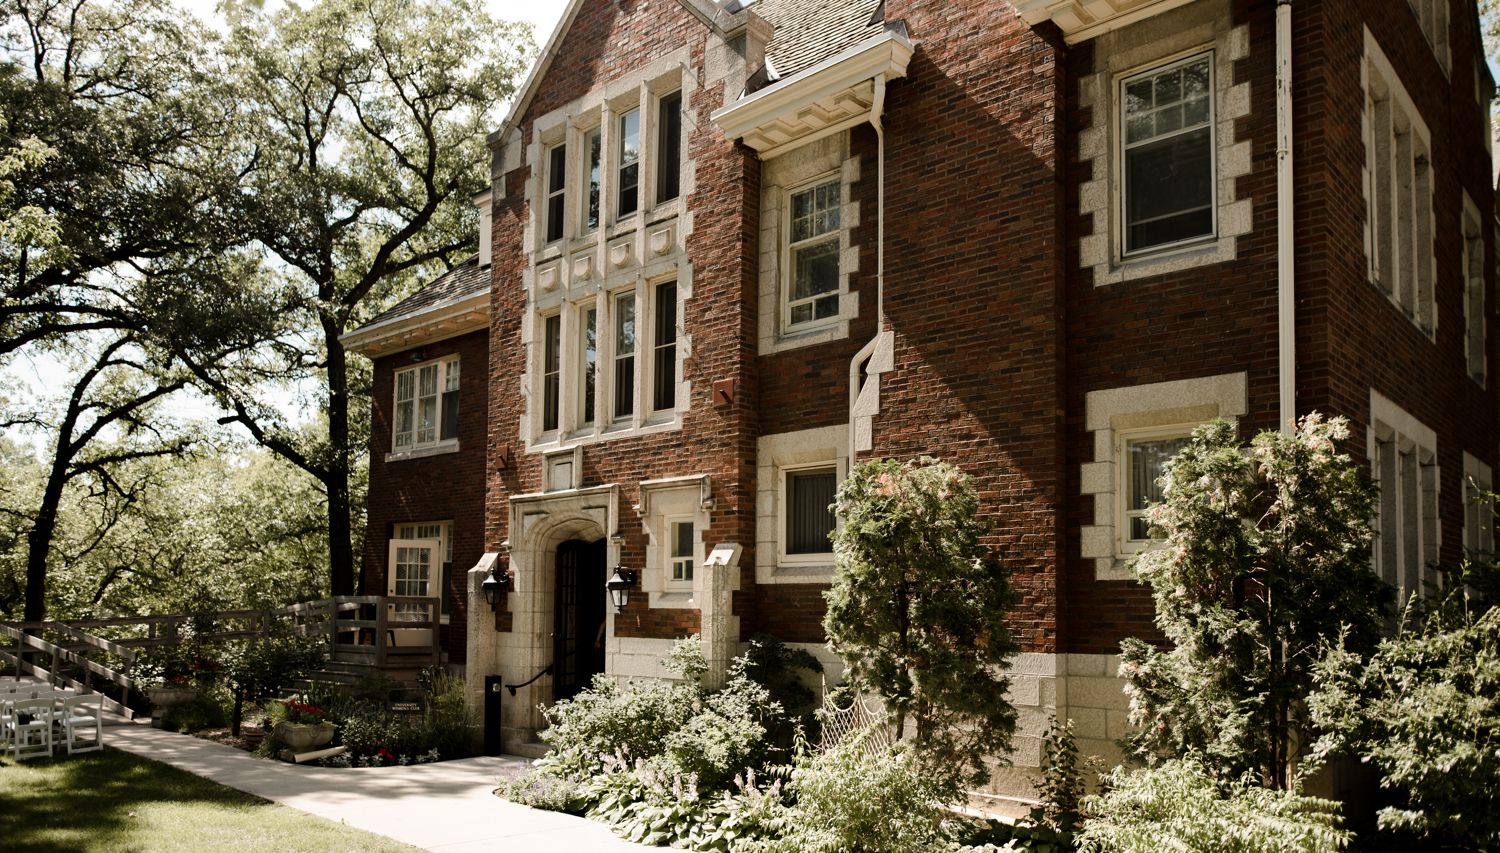 The Ralph Connor house for a downtown winnipeg wedding in July